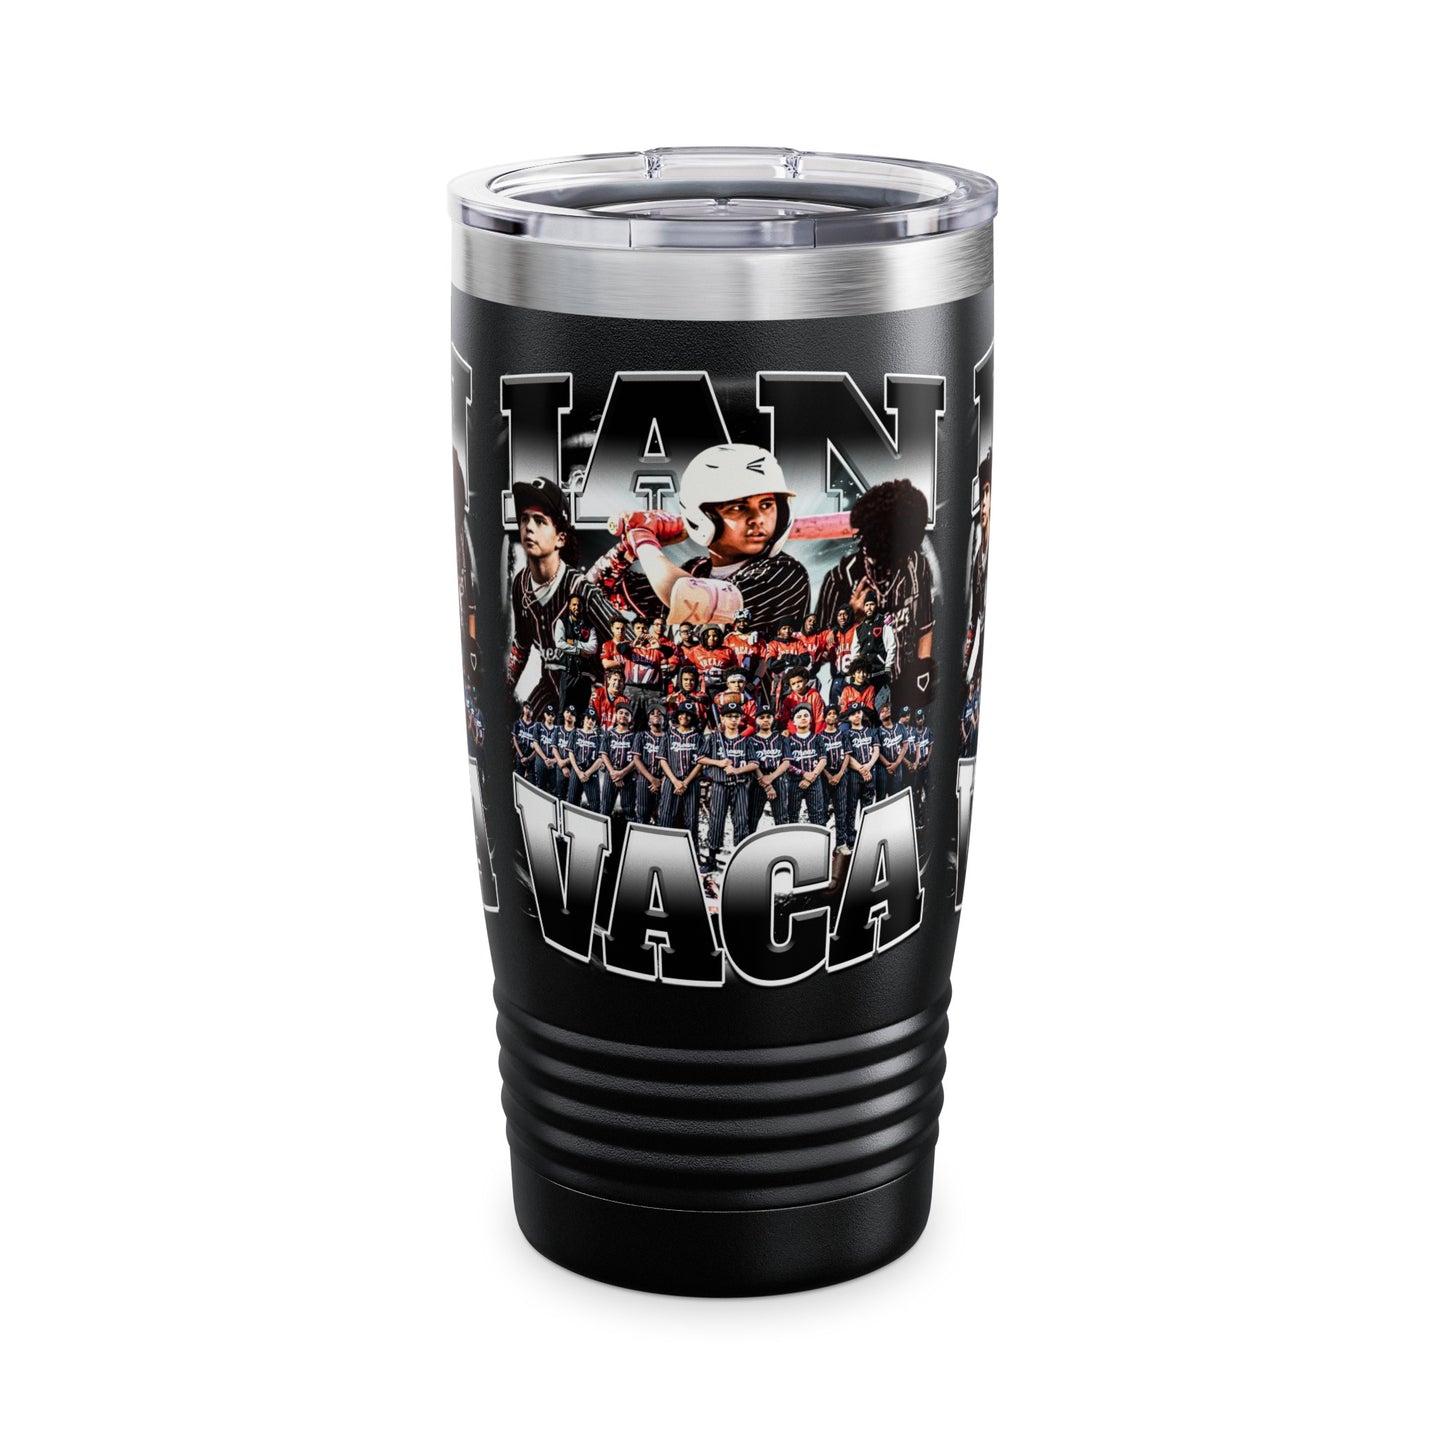 Ian Vaca Stainless Steal Tumbler